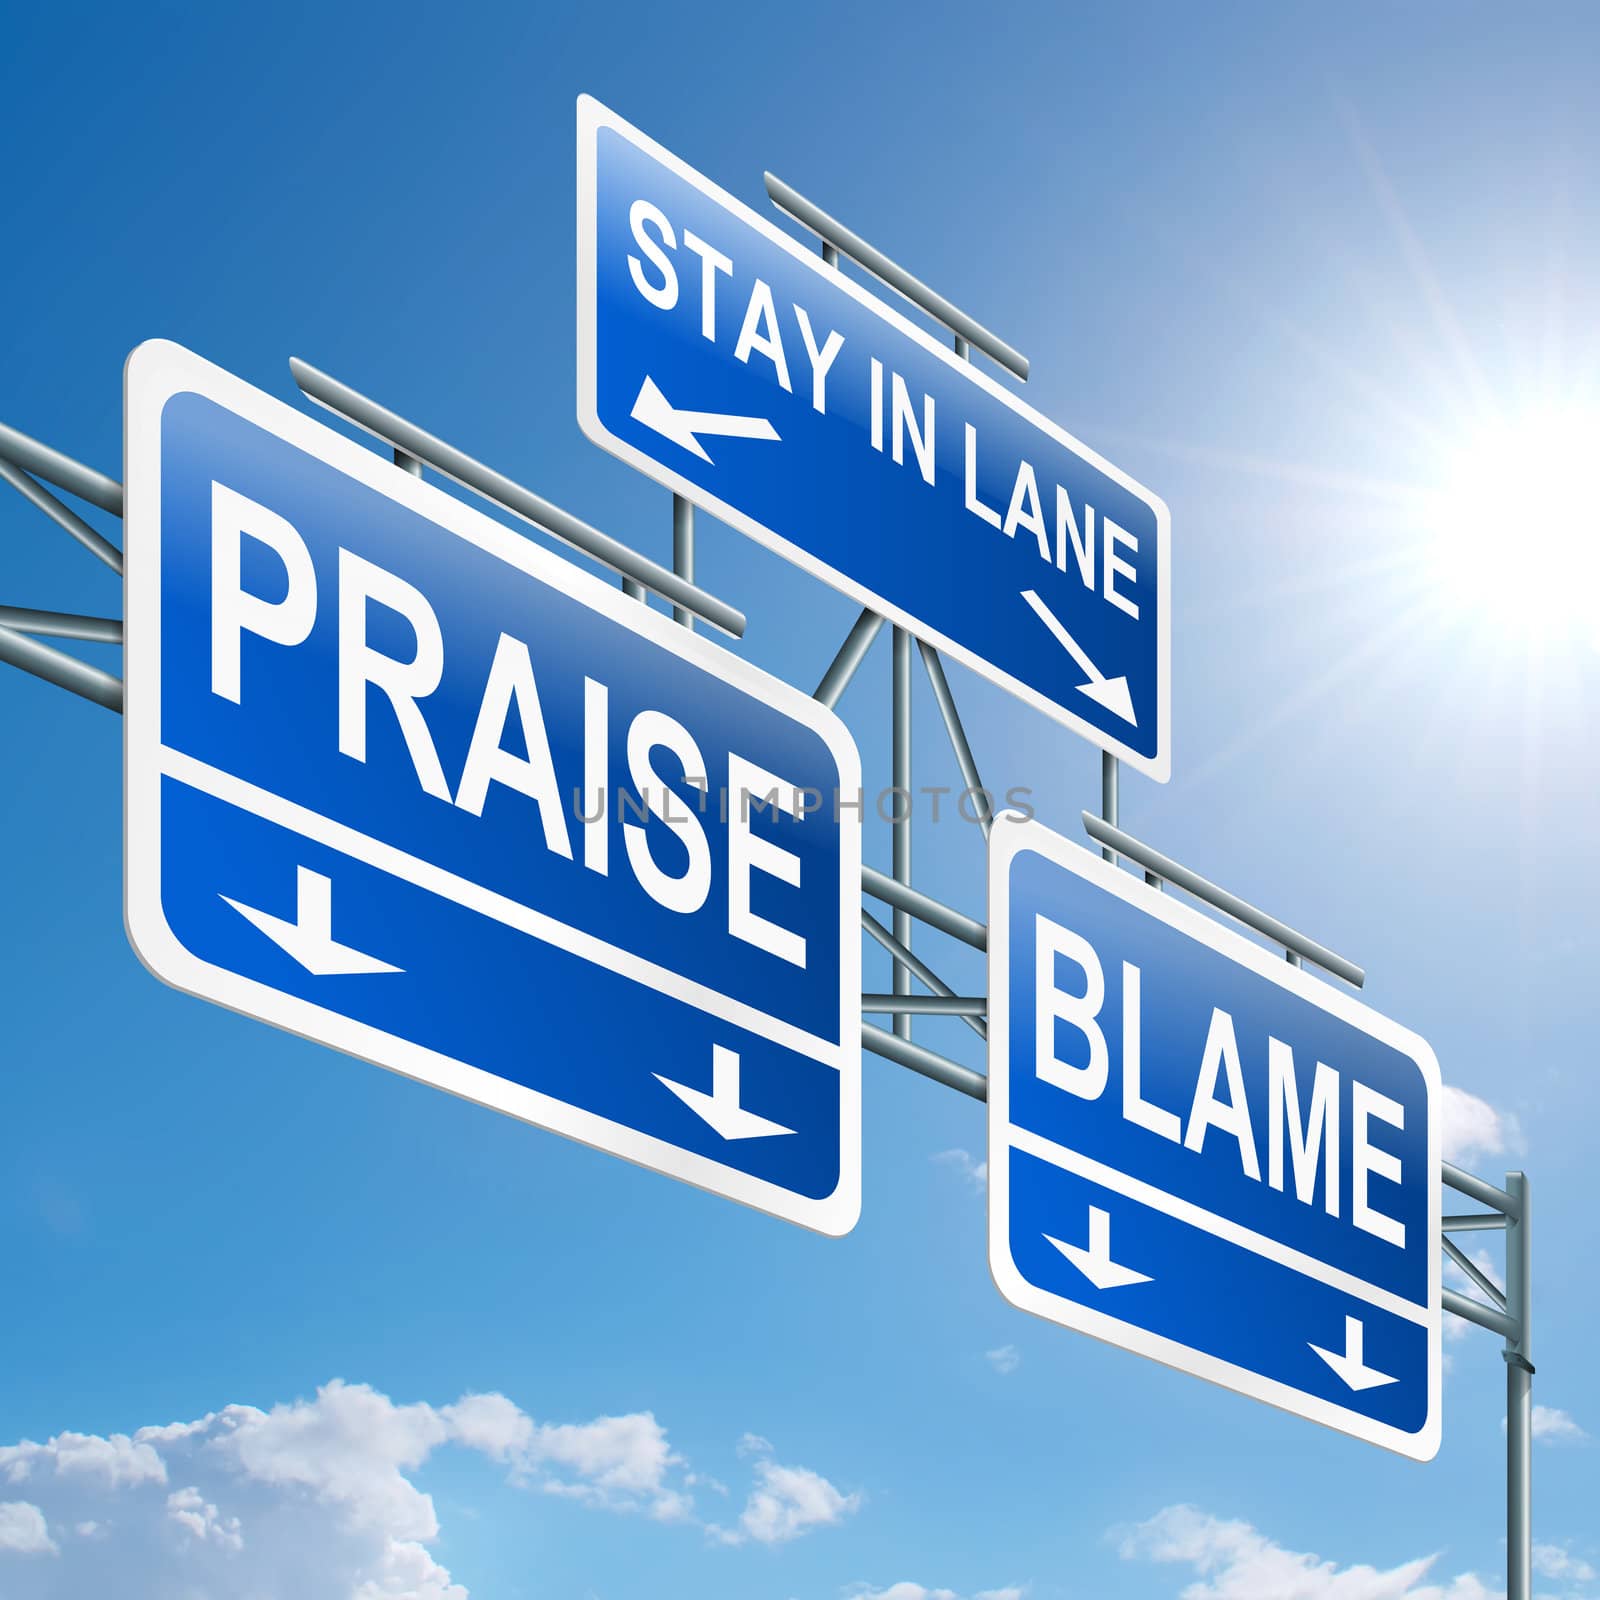 Illustration depicting a highway gantry sign with a praise or blame concept. Blue sky background.